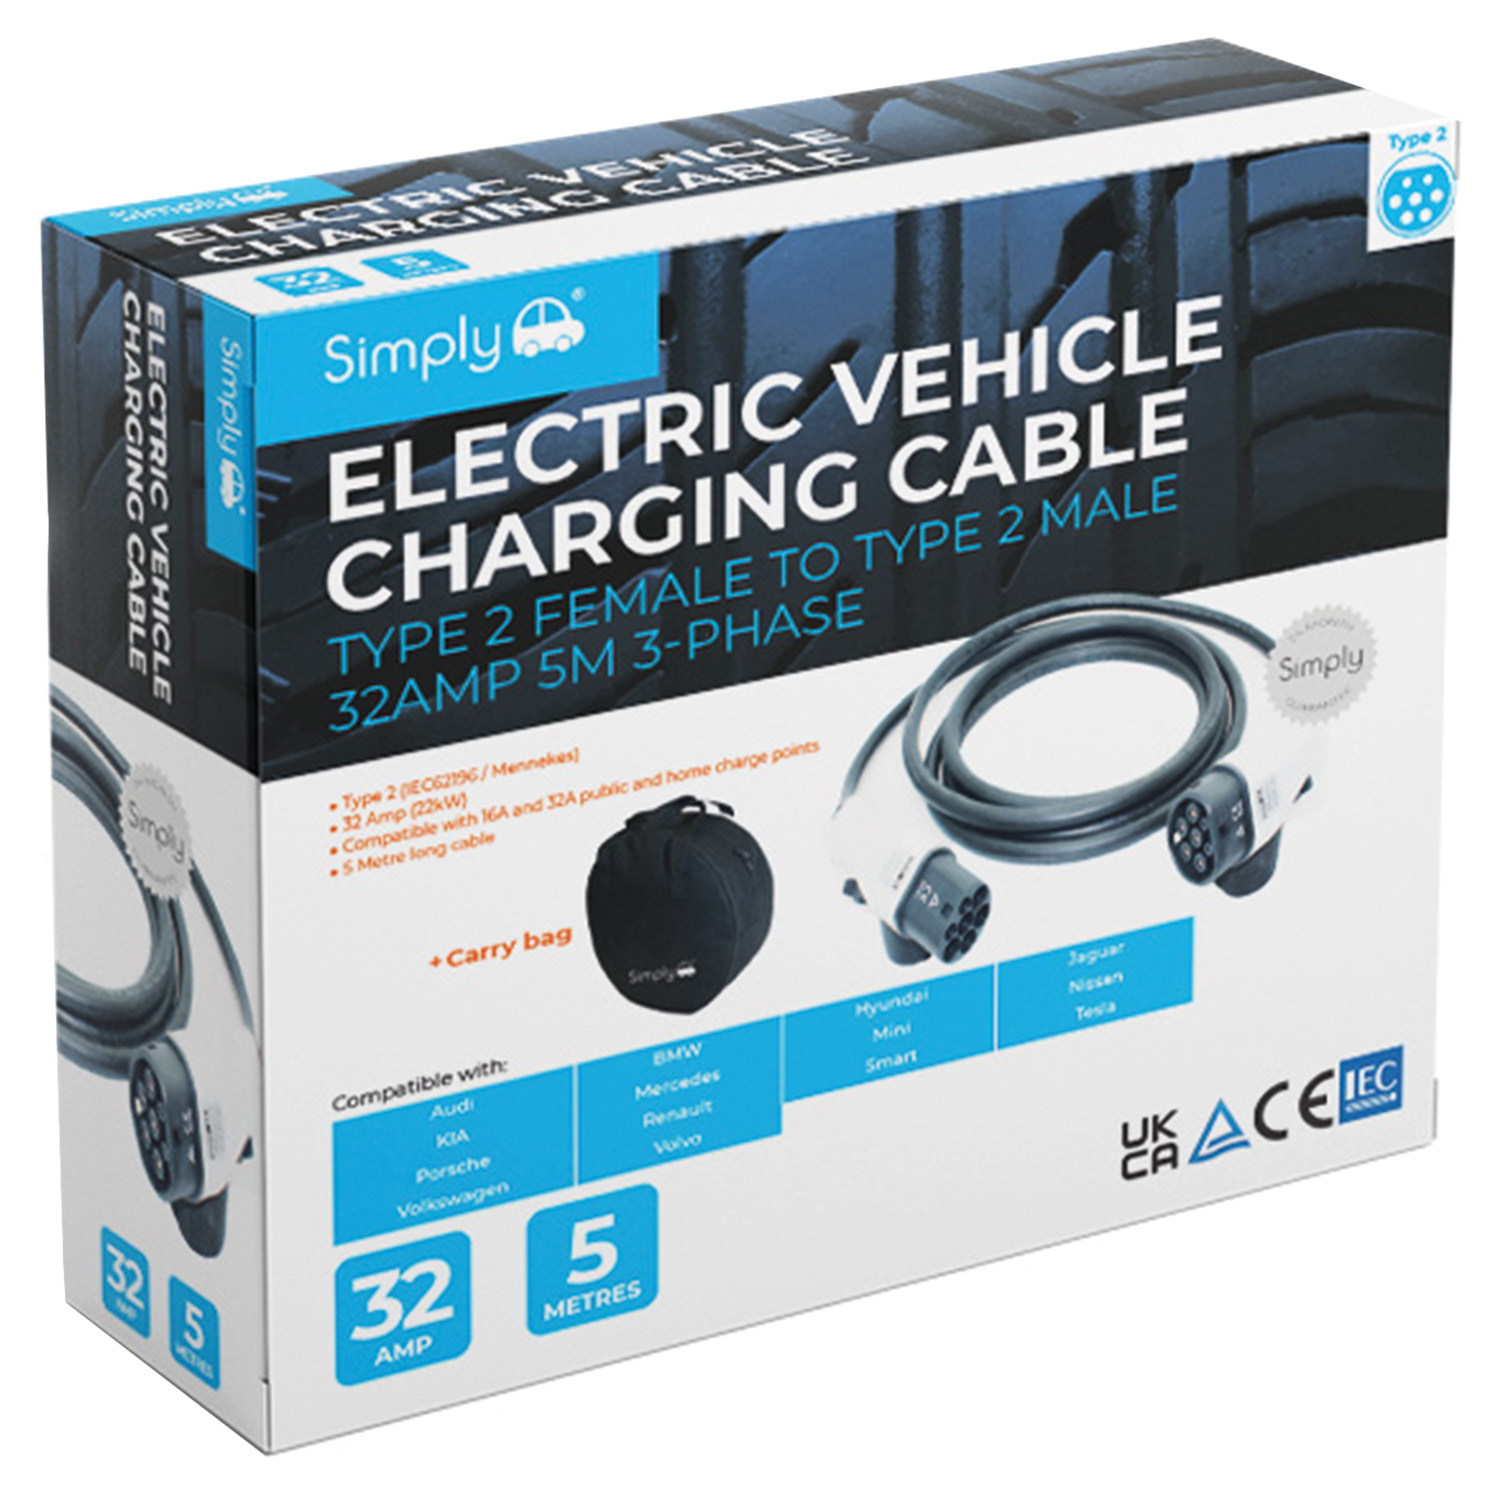 Electric Vehicle Charging Cable - Type 2 F to Type 2 M (3-Phase) Image 1